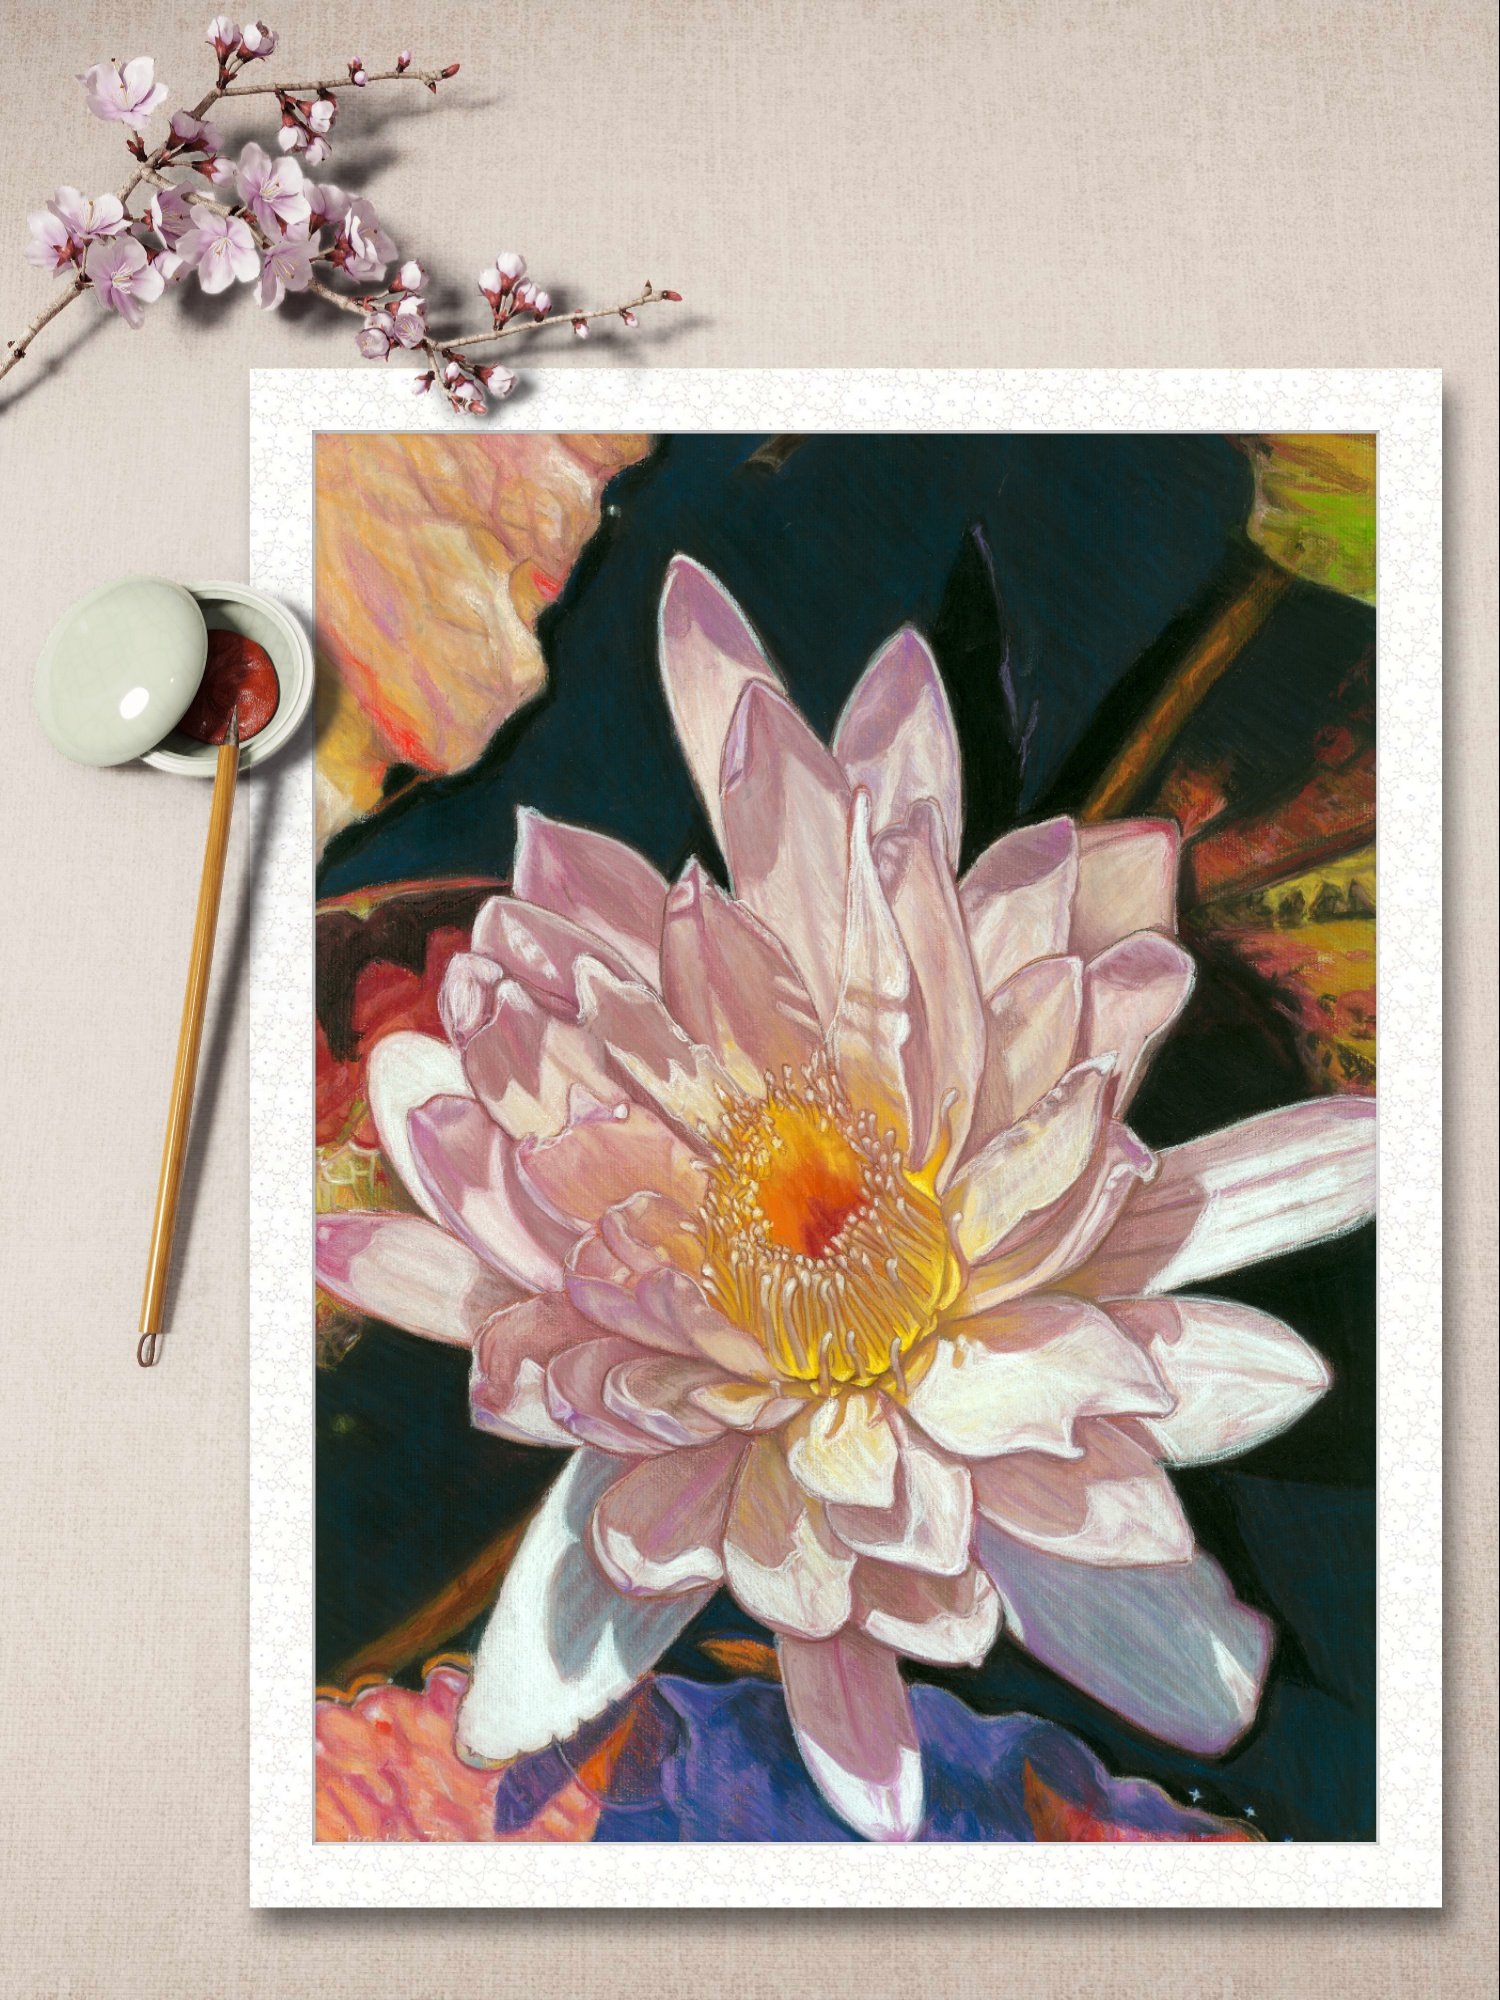 aperfectlily_white_waterlily_pastel_painting_giclee_print_wall_art6.JPG